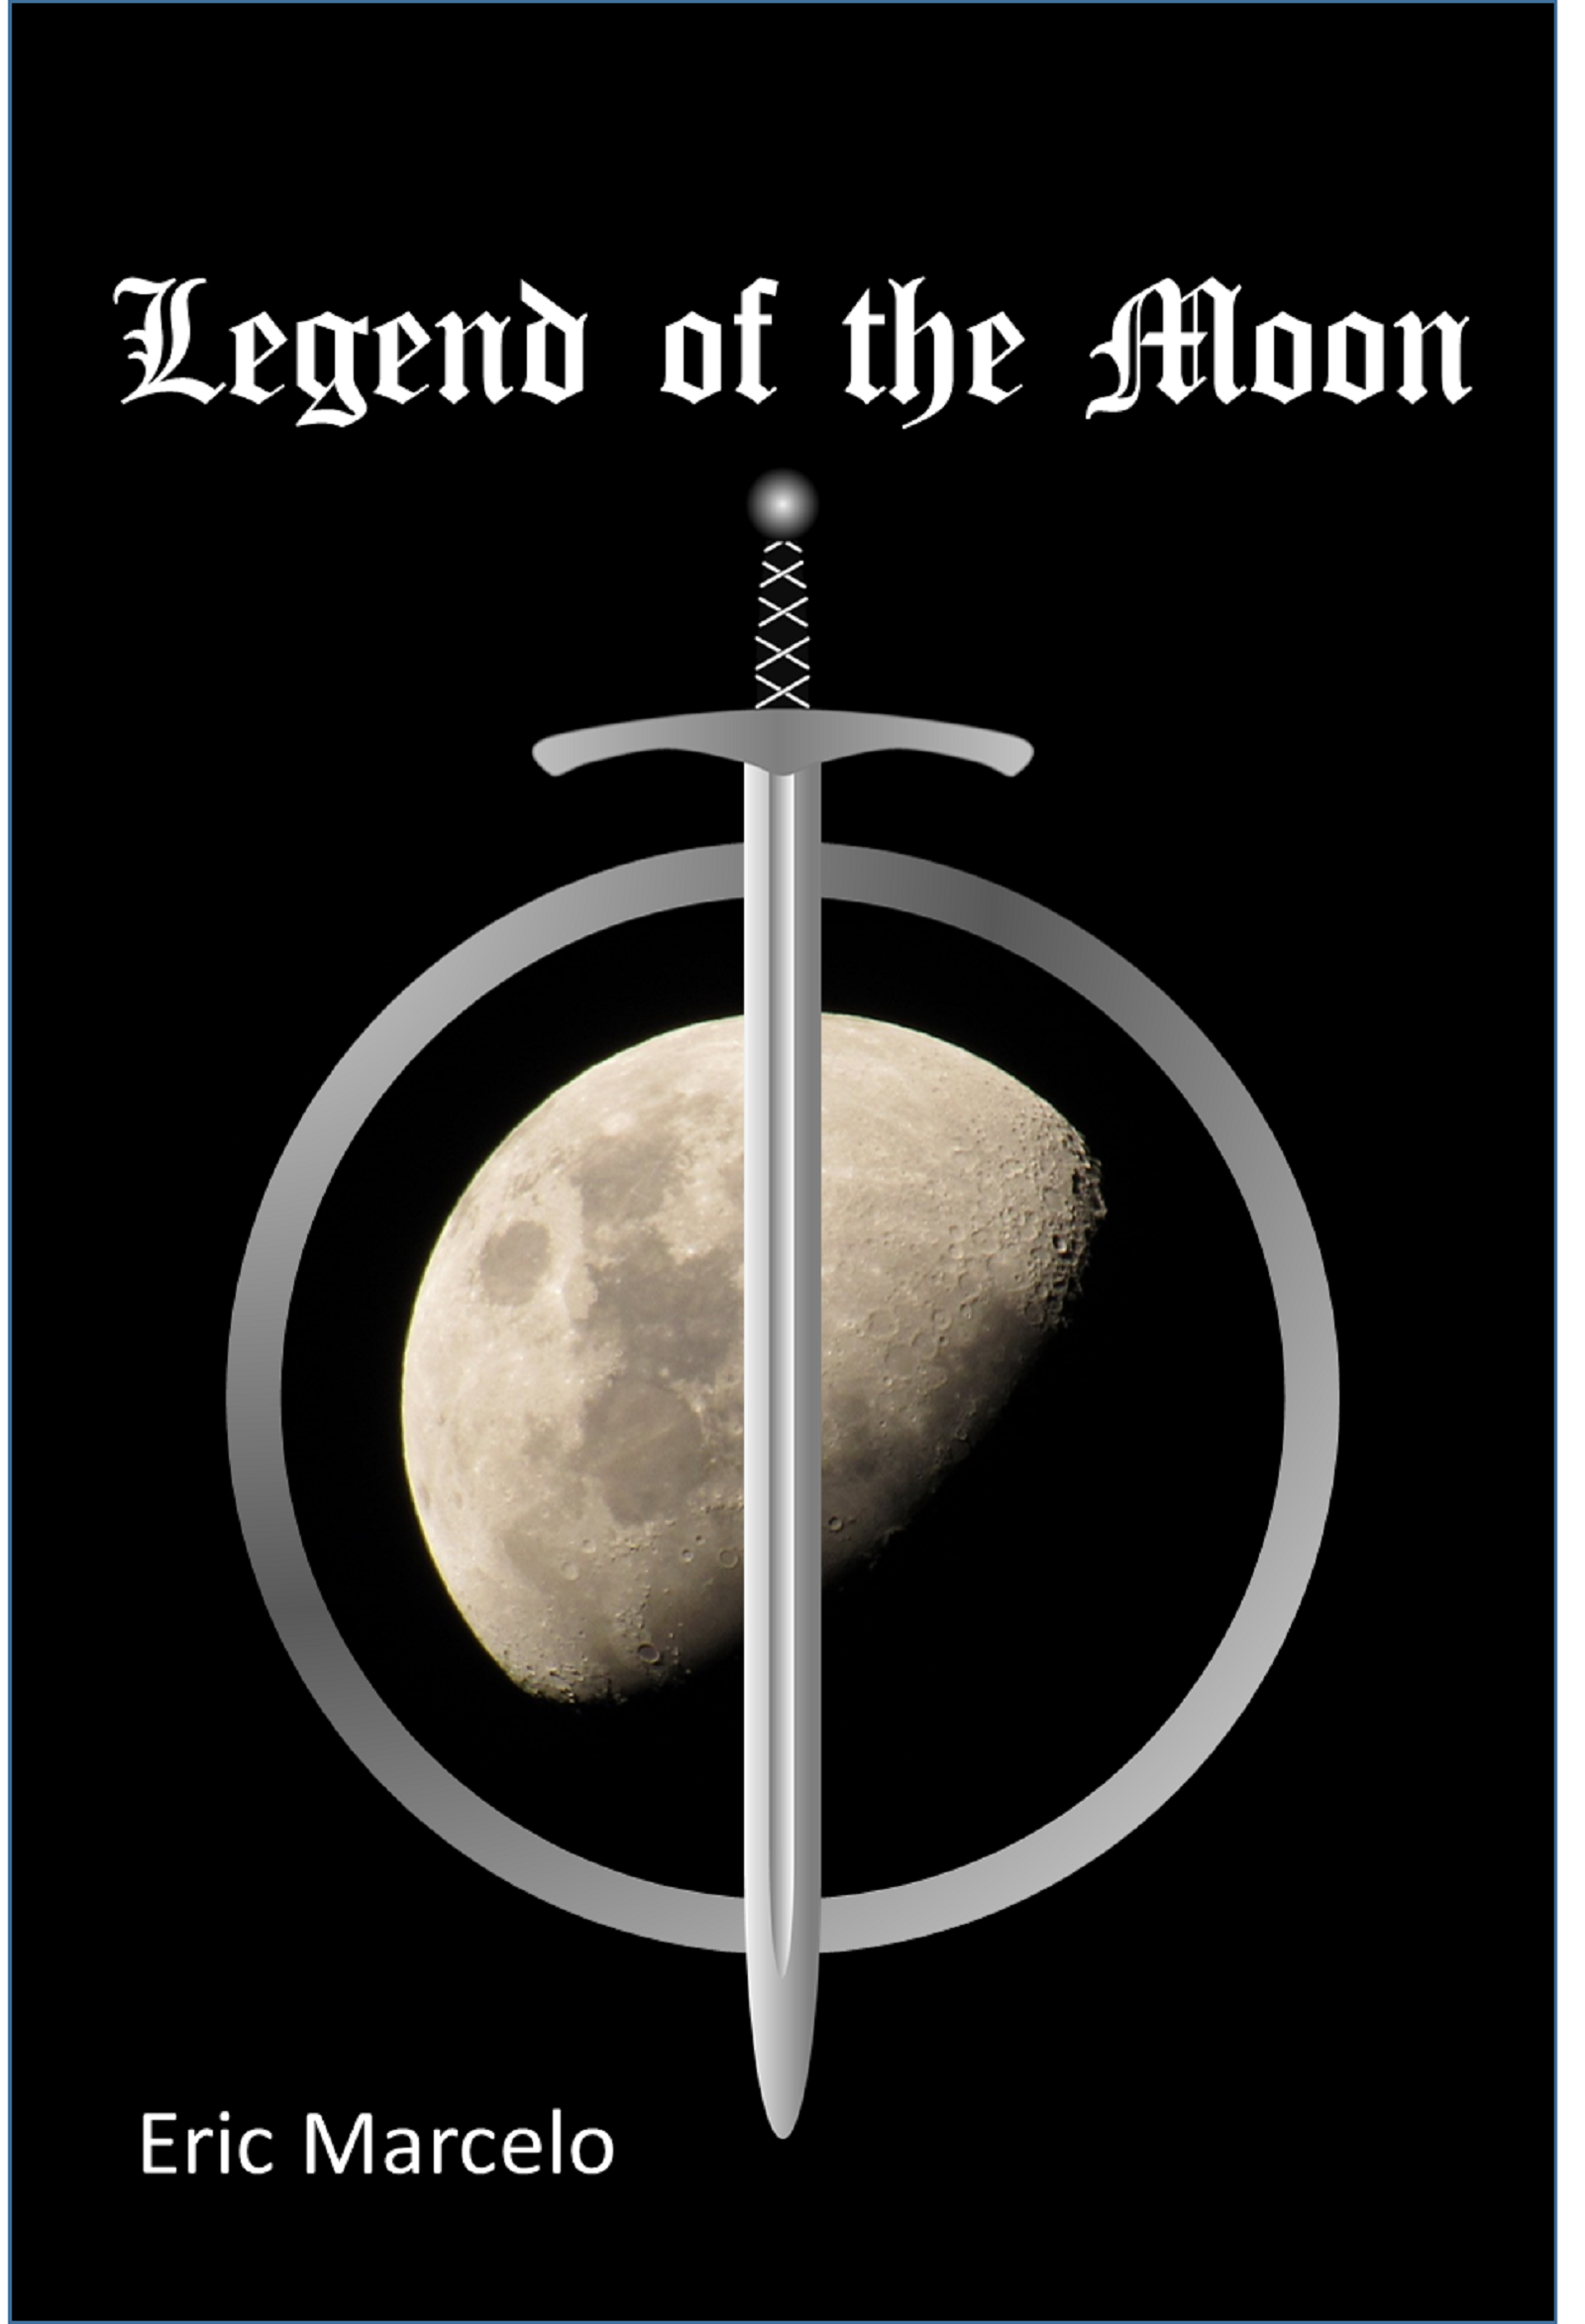  Legend of the Moon